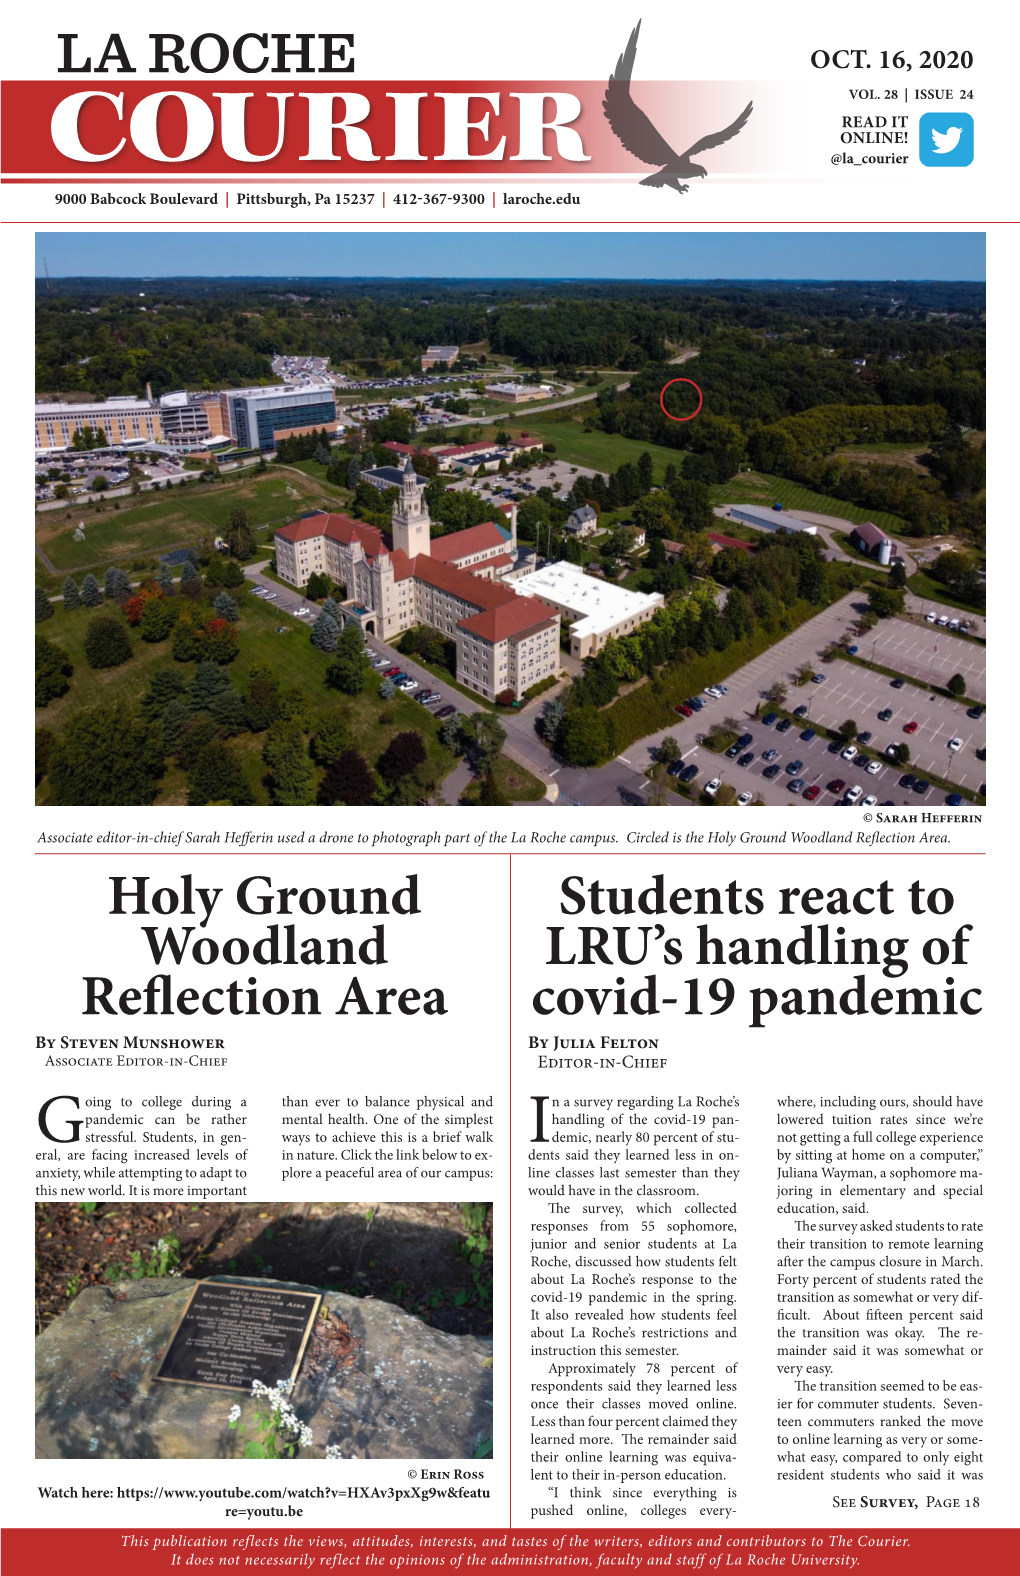 Holy Ground Woodland Reflection Area Students React to LRU's Handling of Covid-19 Pandemic